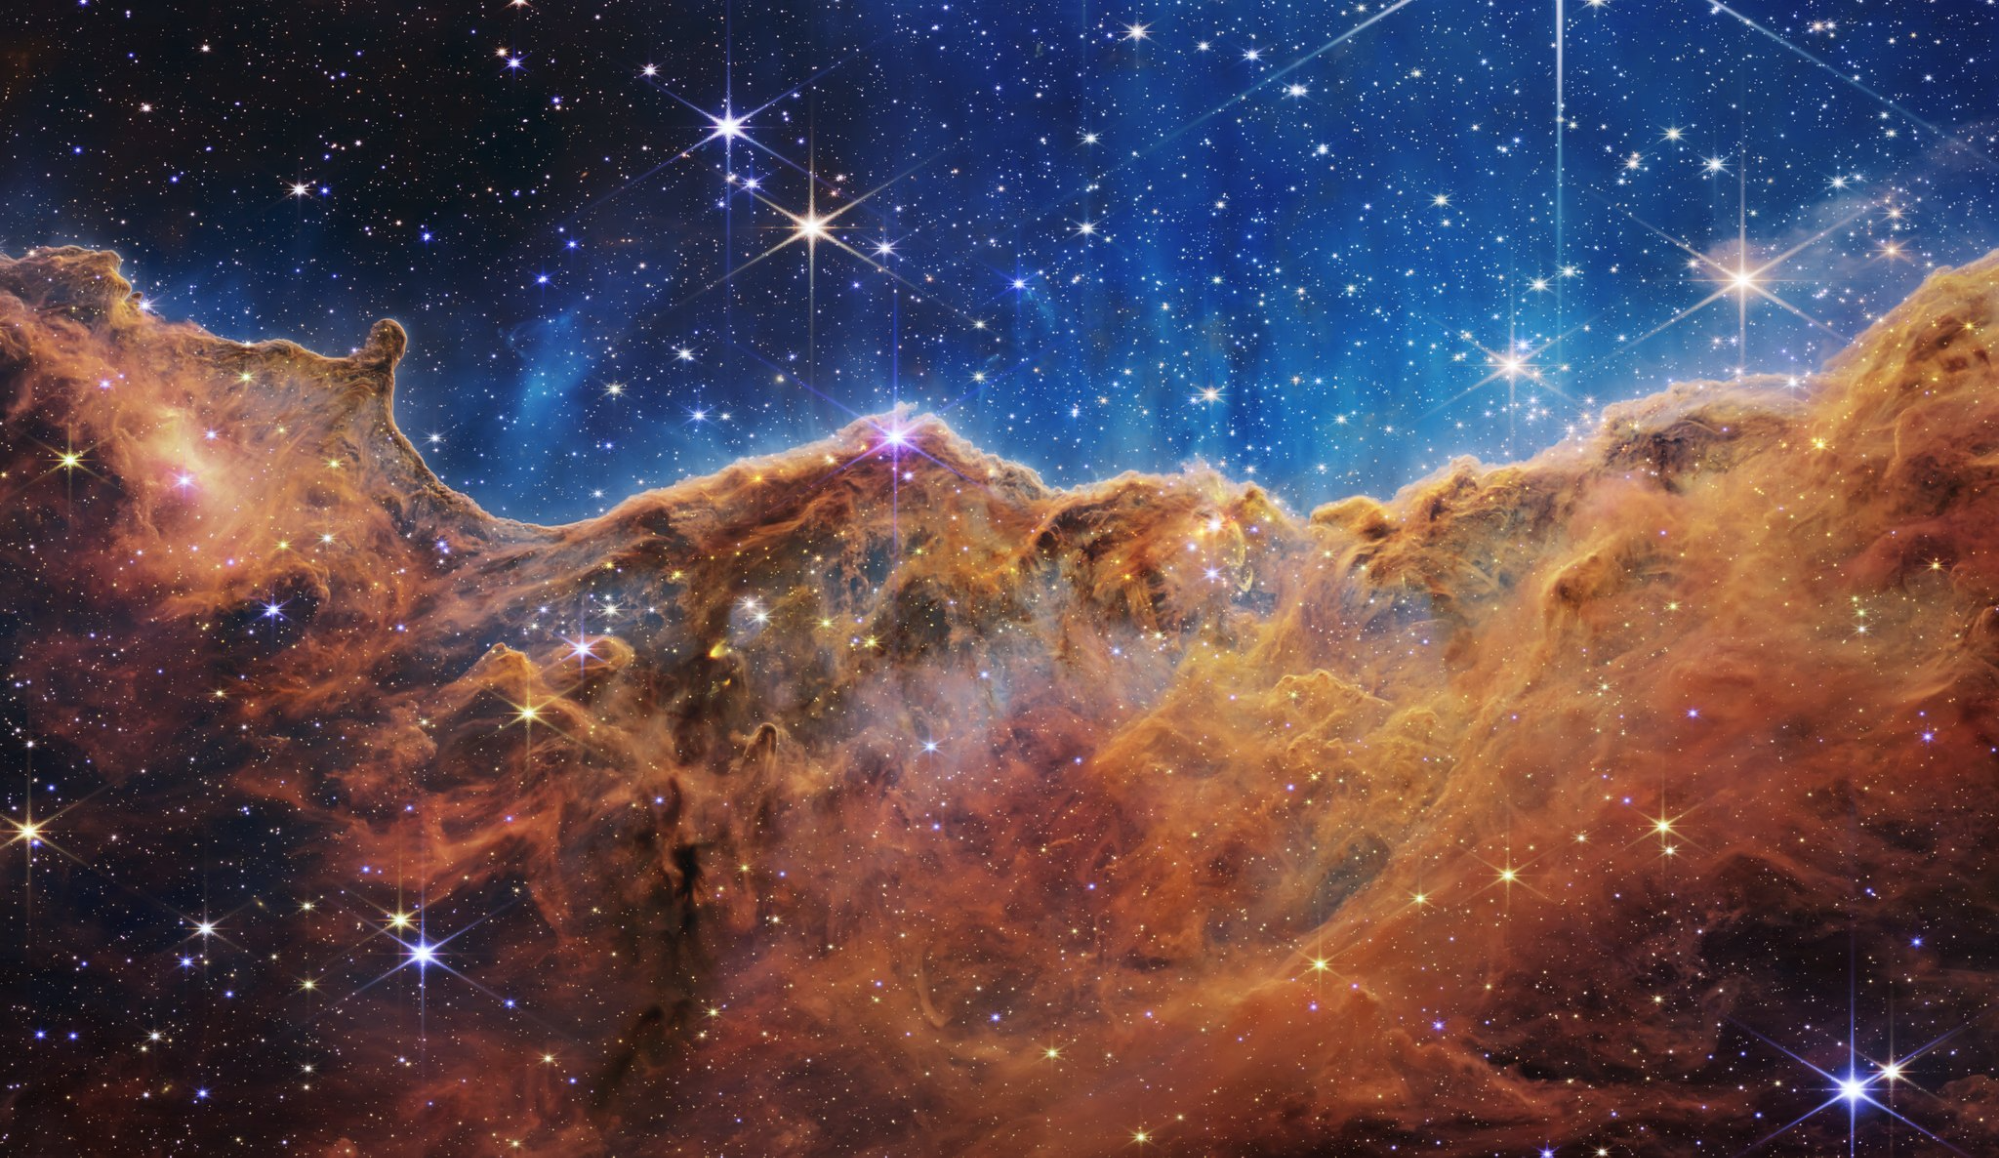 How the James Webb Telescope's cosmic pictures impacted the Internet